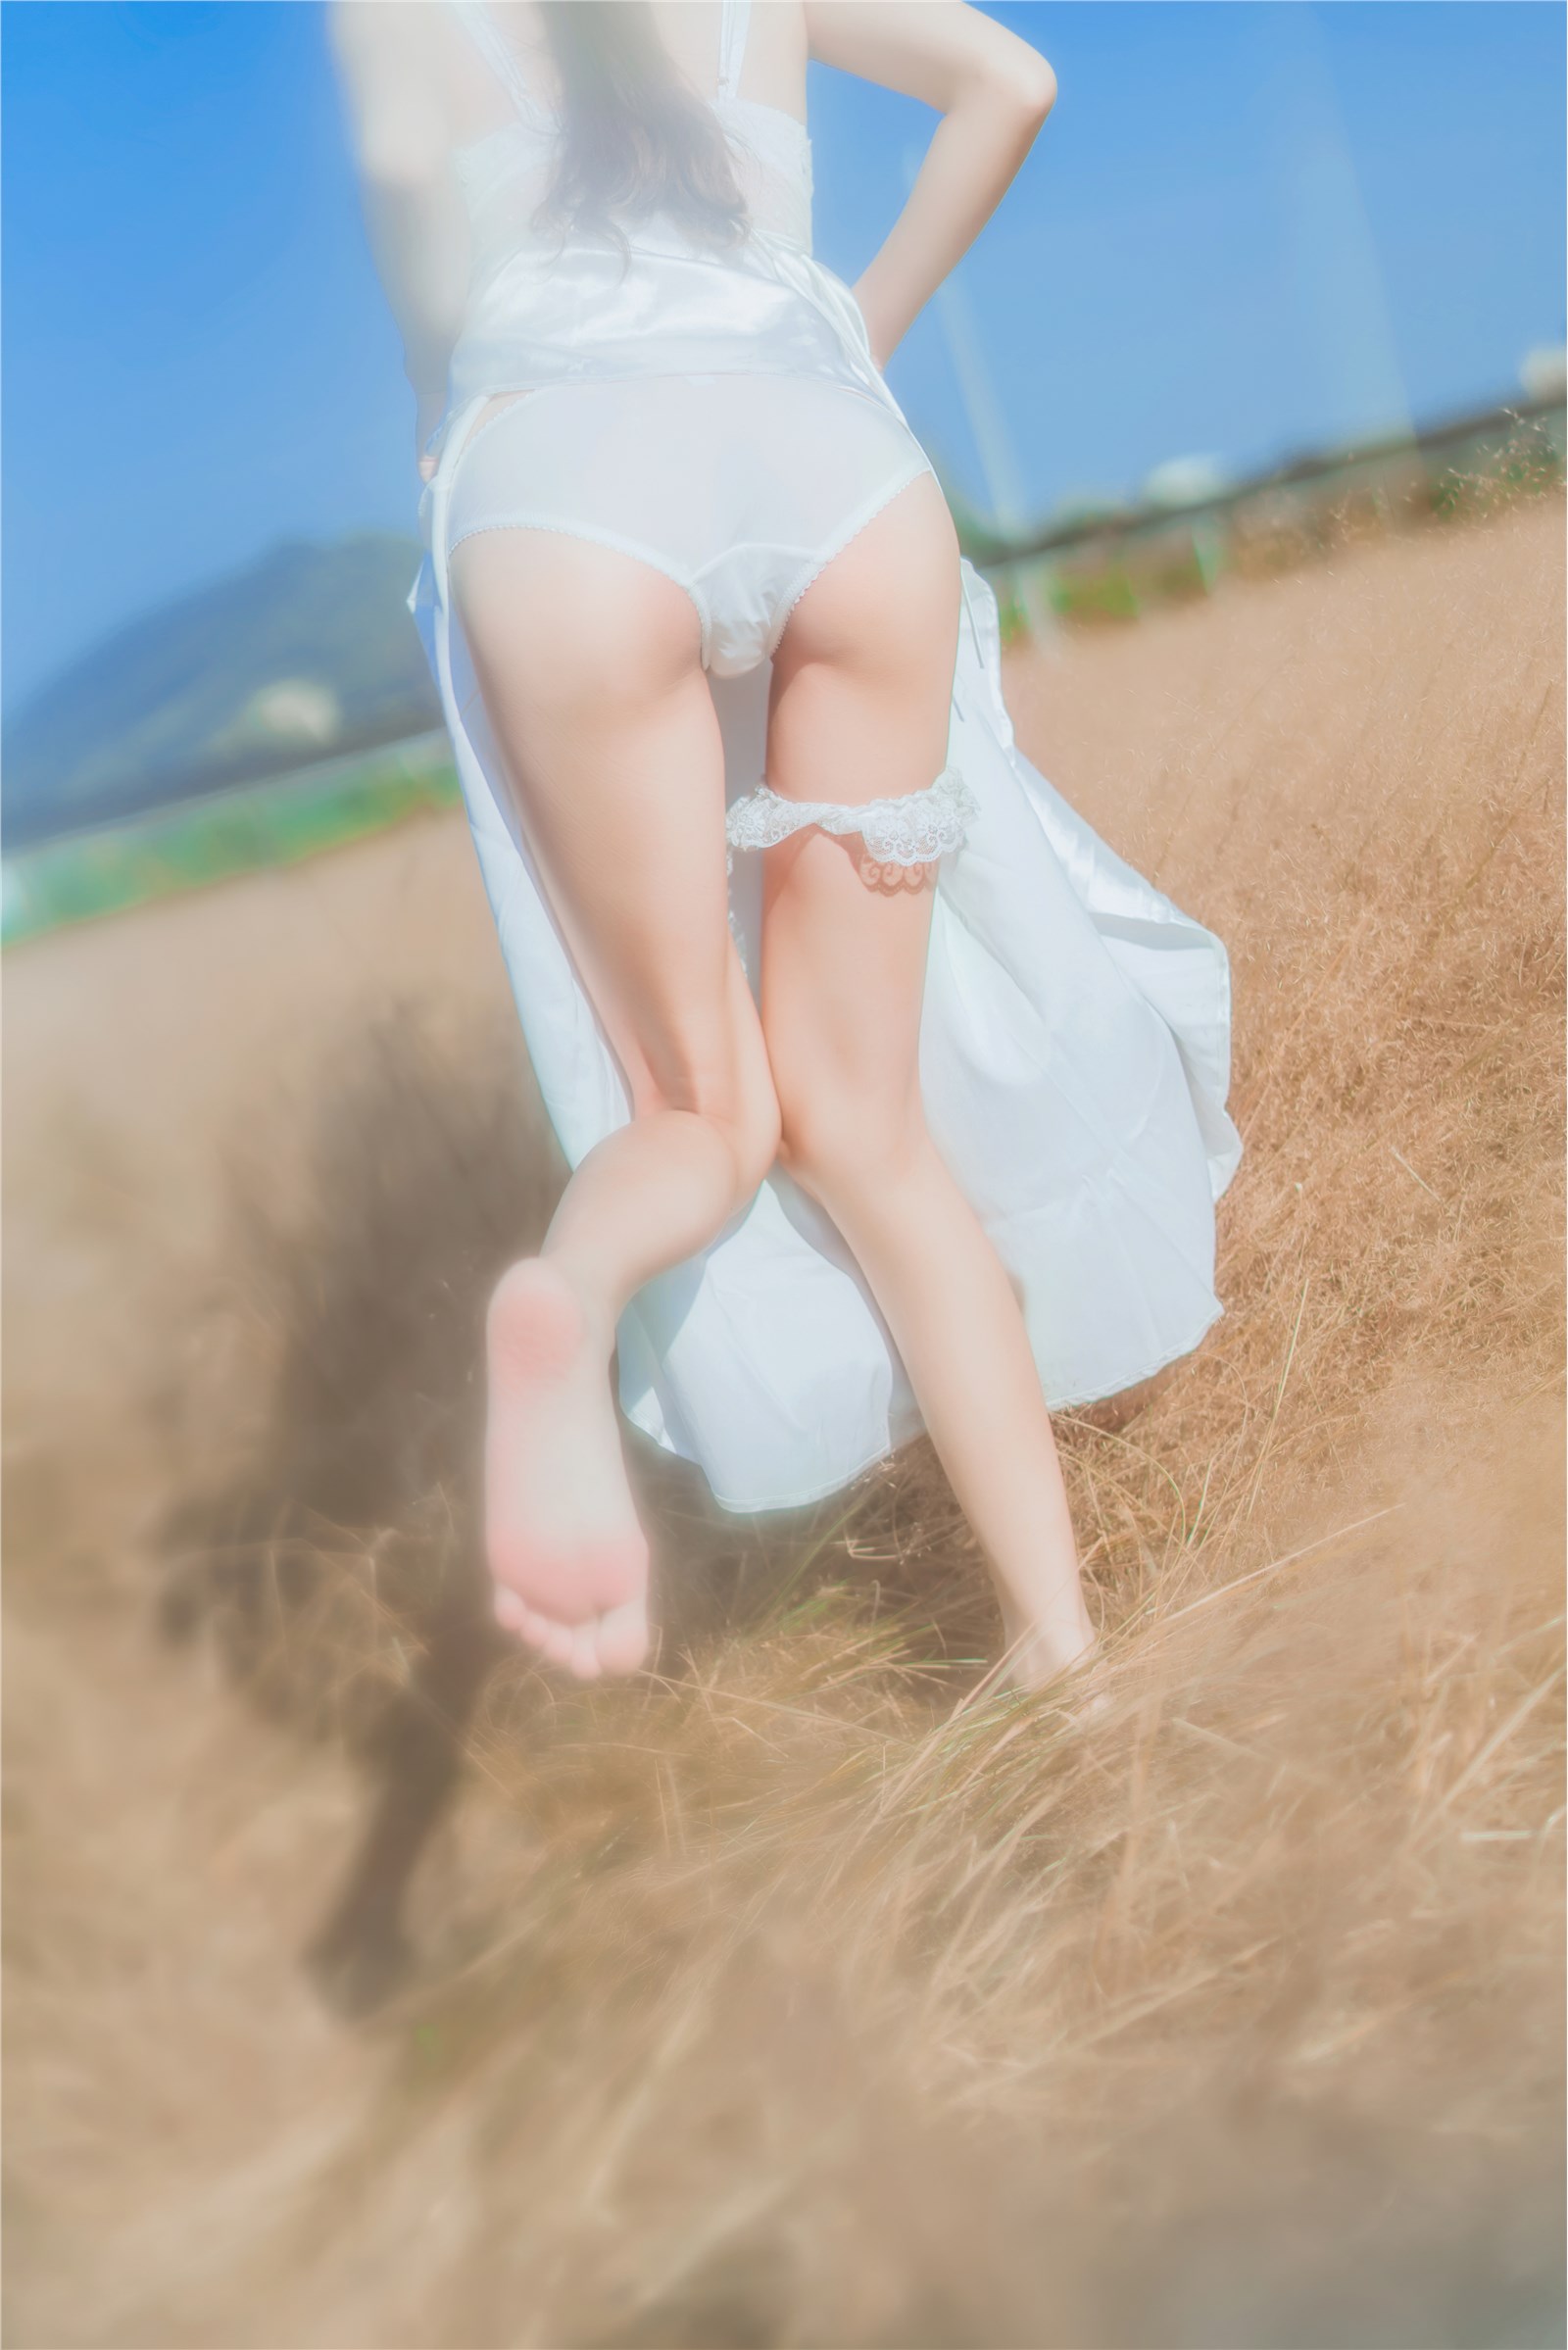 Ourei -- top NO.014 Hibernating in a white dress(25)